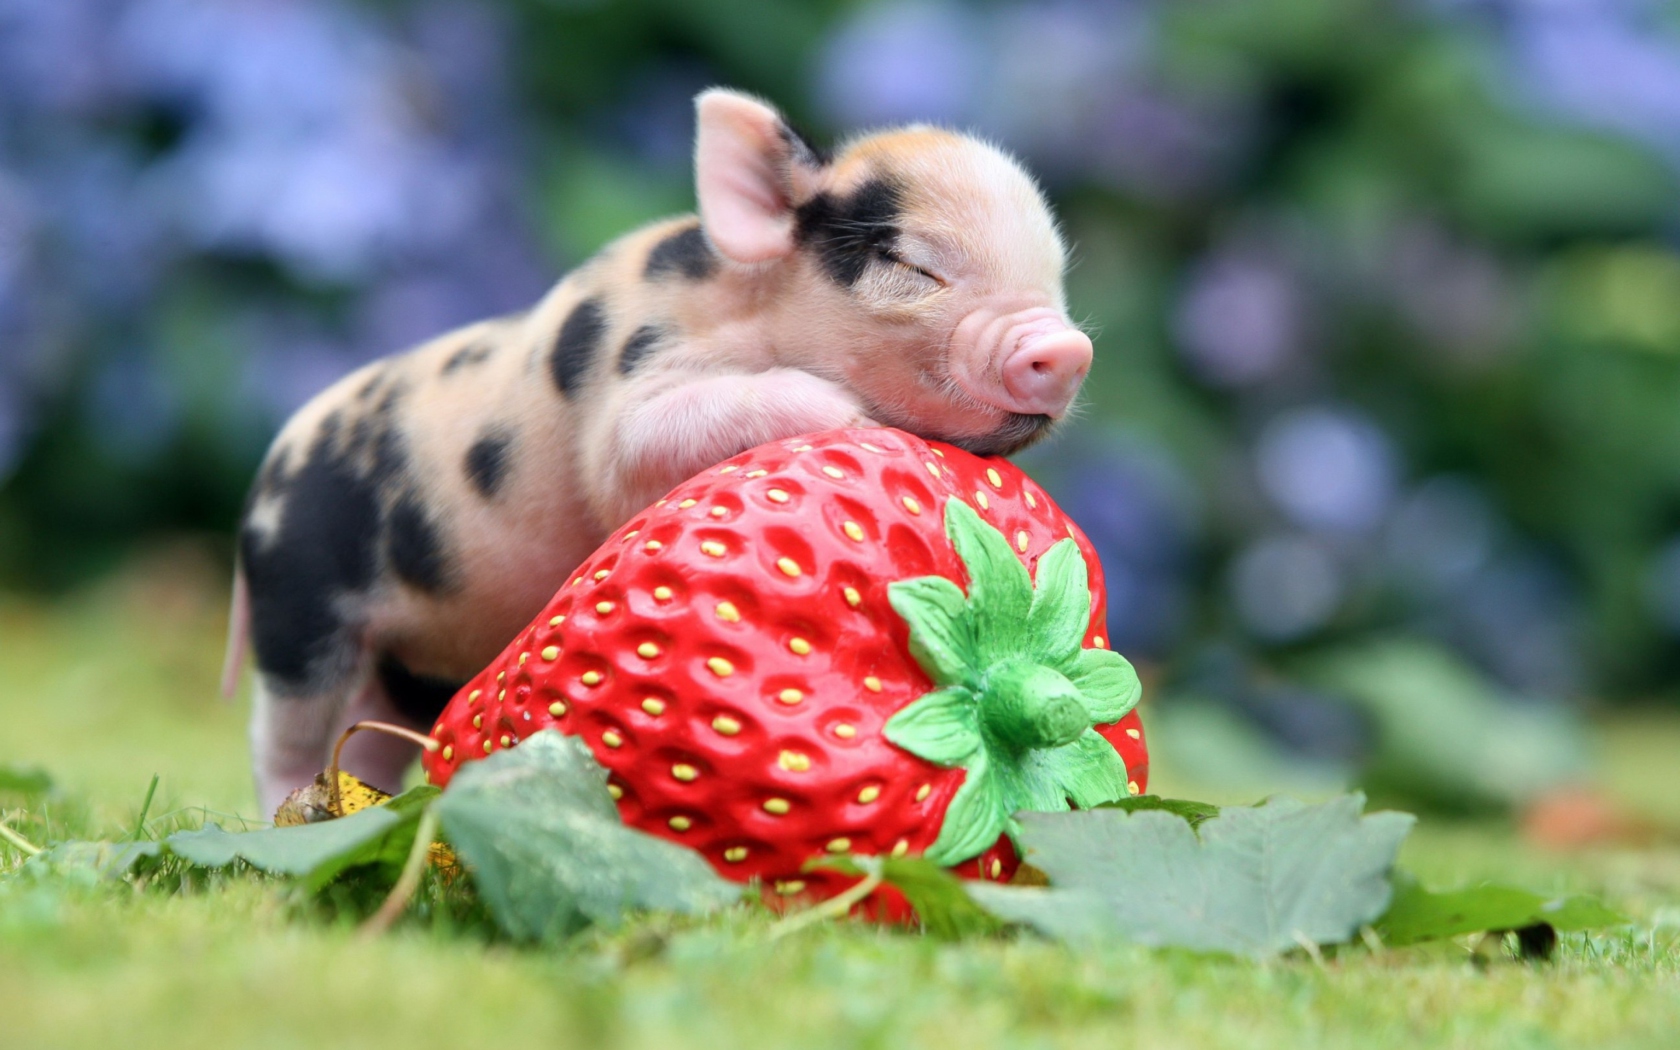 Cute Little Piglet And Strawberry wallpaper 1680x1050